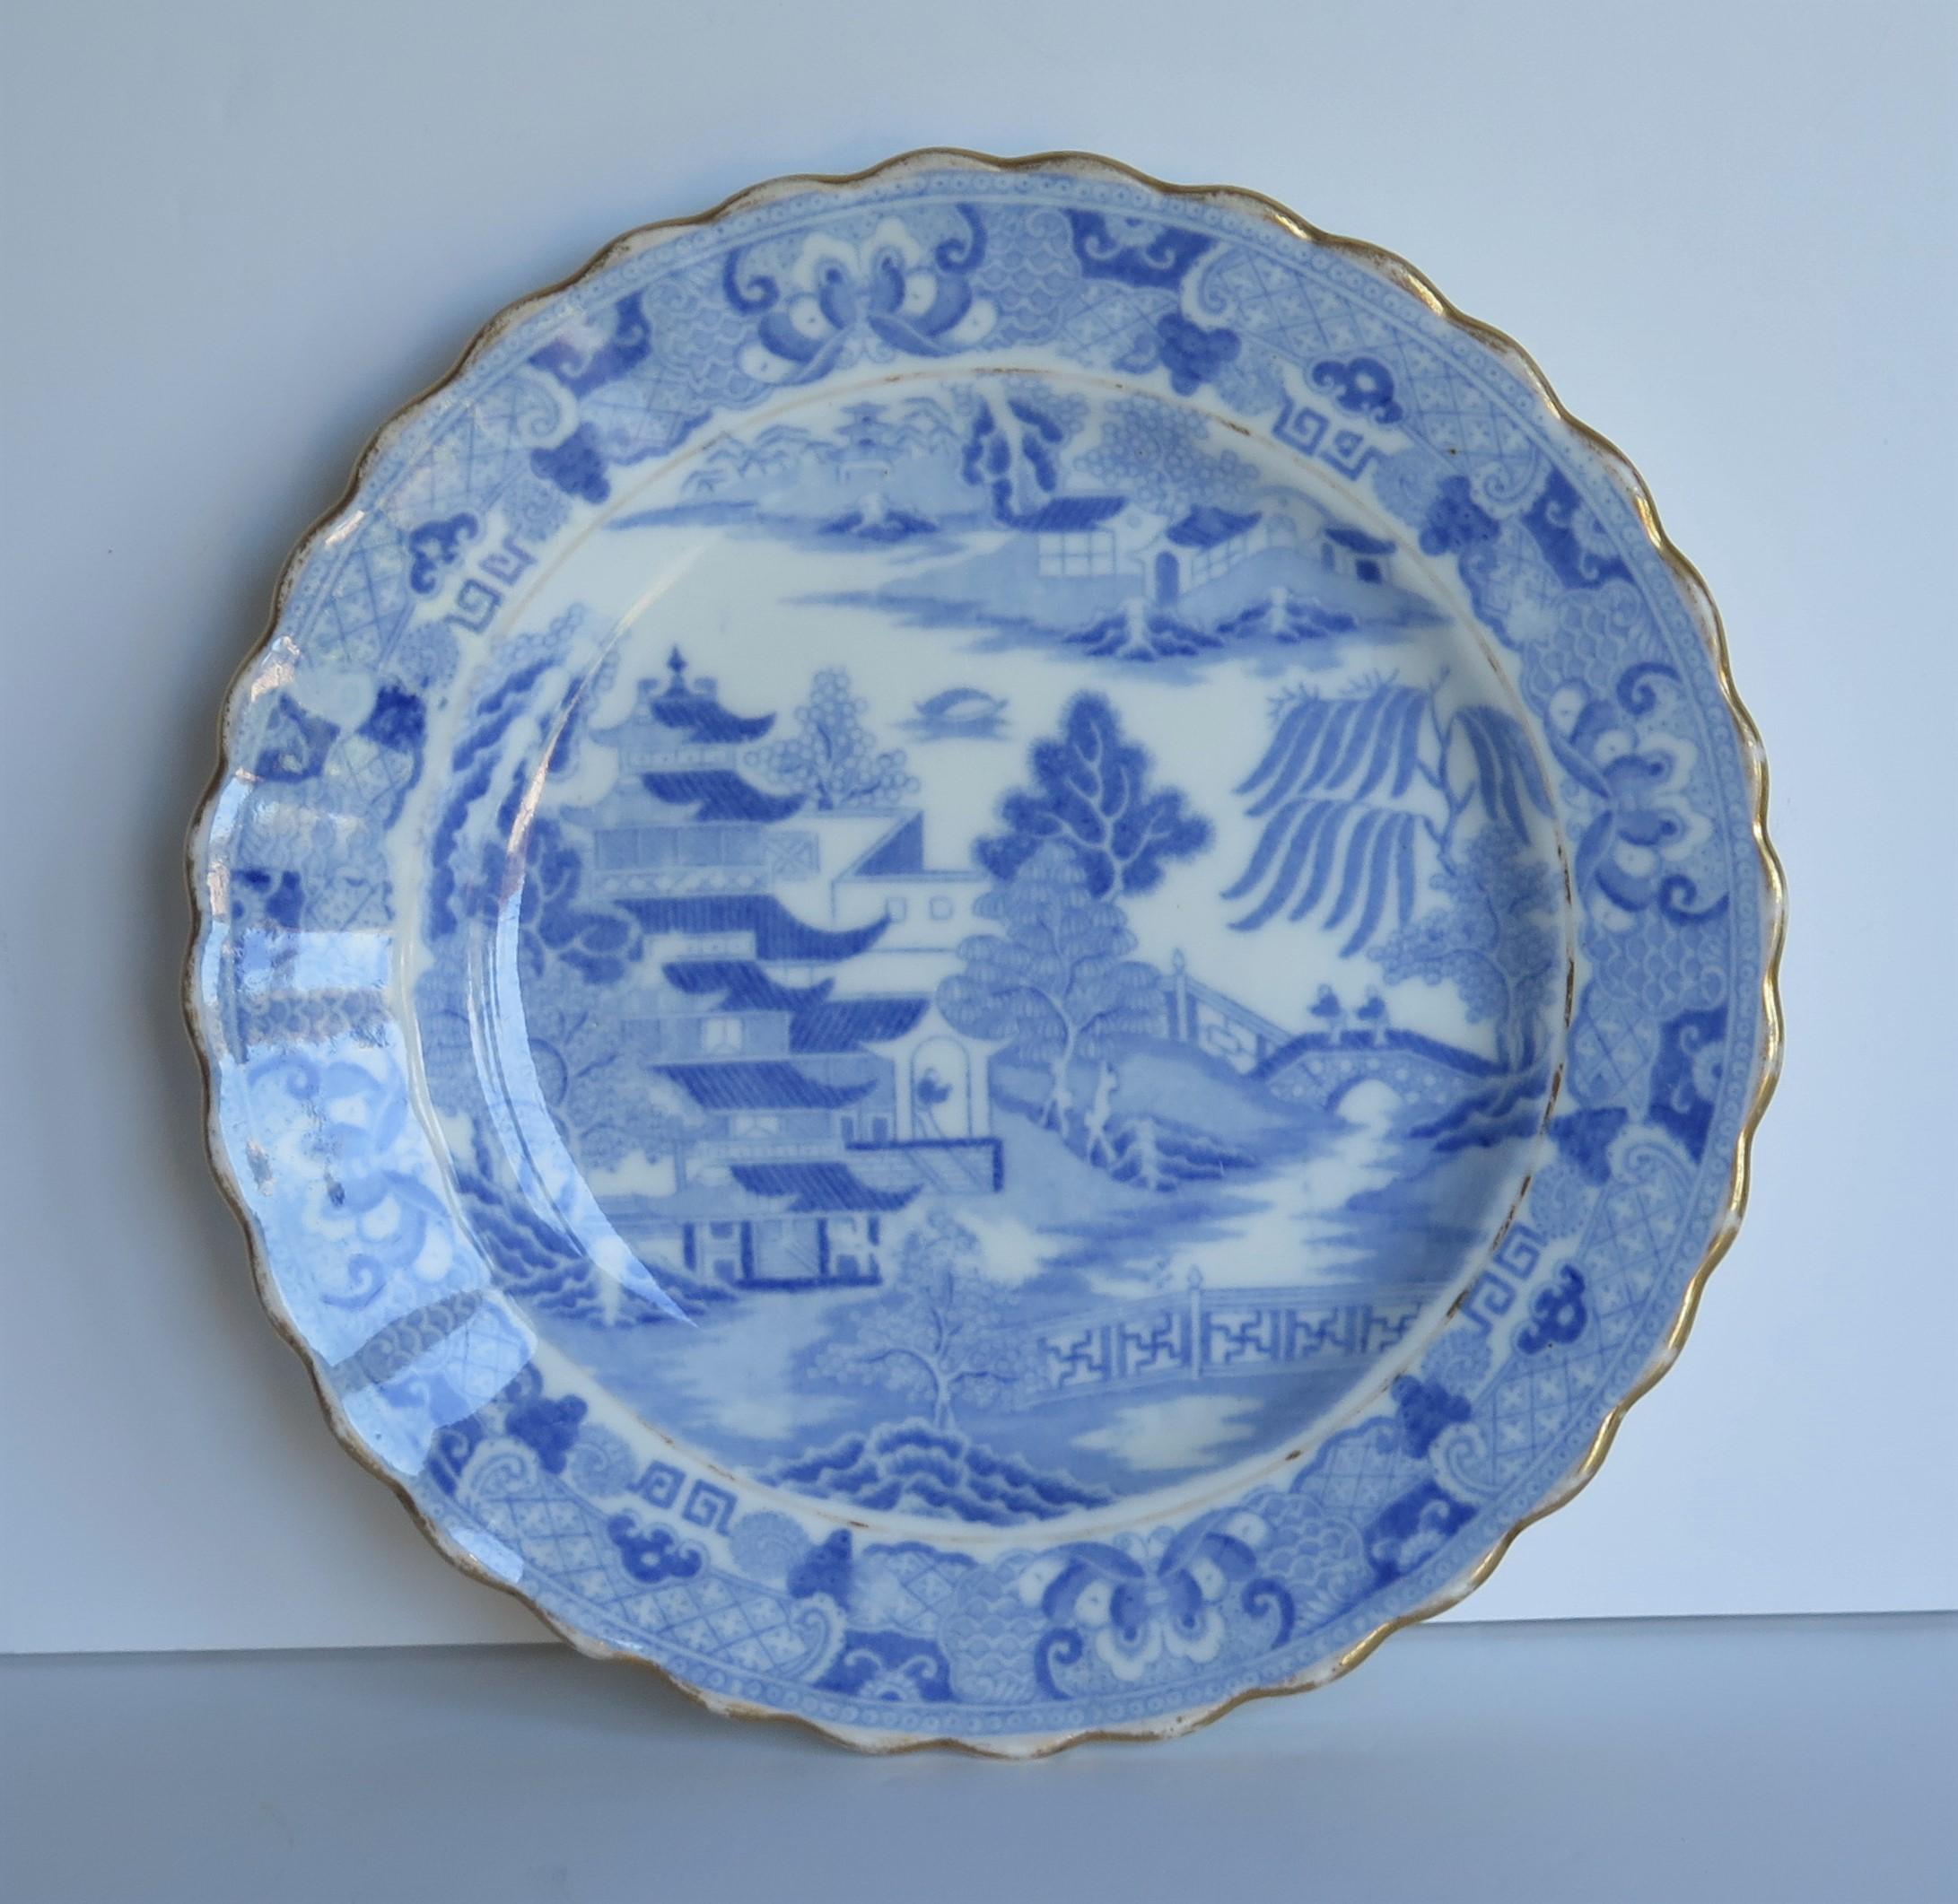 This is porcelain blue and white, hand gilded desert dish or plate made by Miles Mason (Mason's), Staffordshire Potteries, England around the turn of the 18th century, circa 1800.

The dish is well potted on a low foot with a scalloped wavy